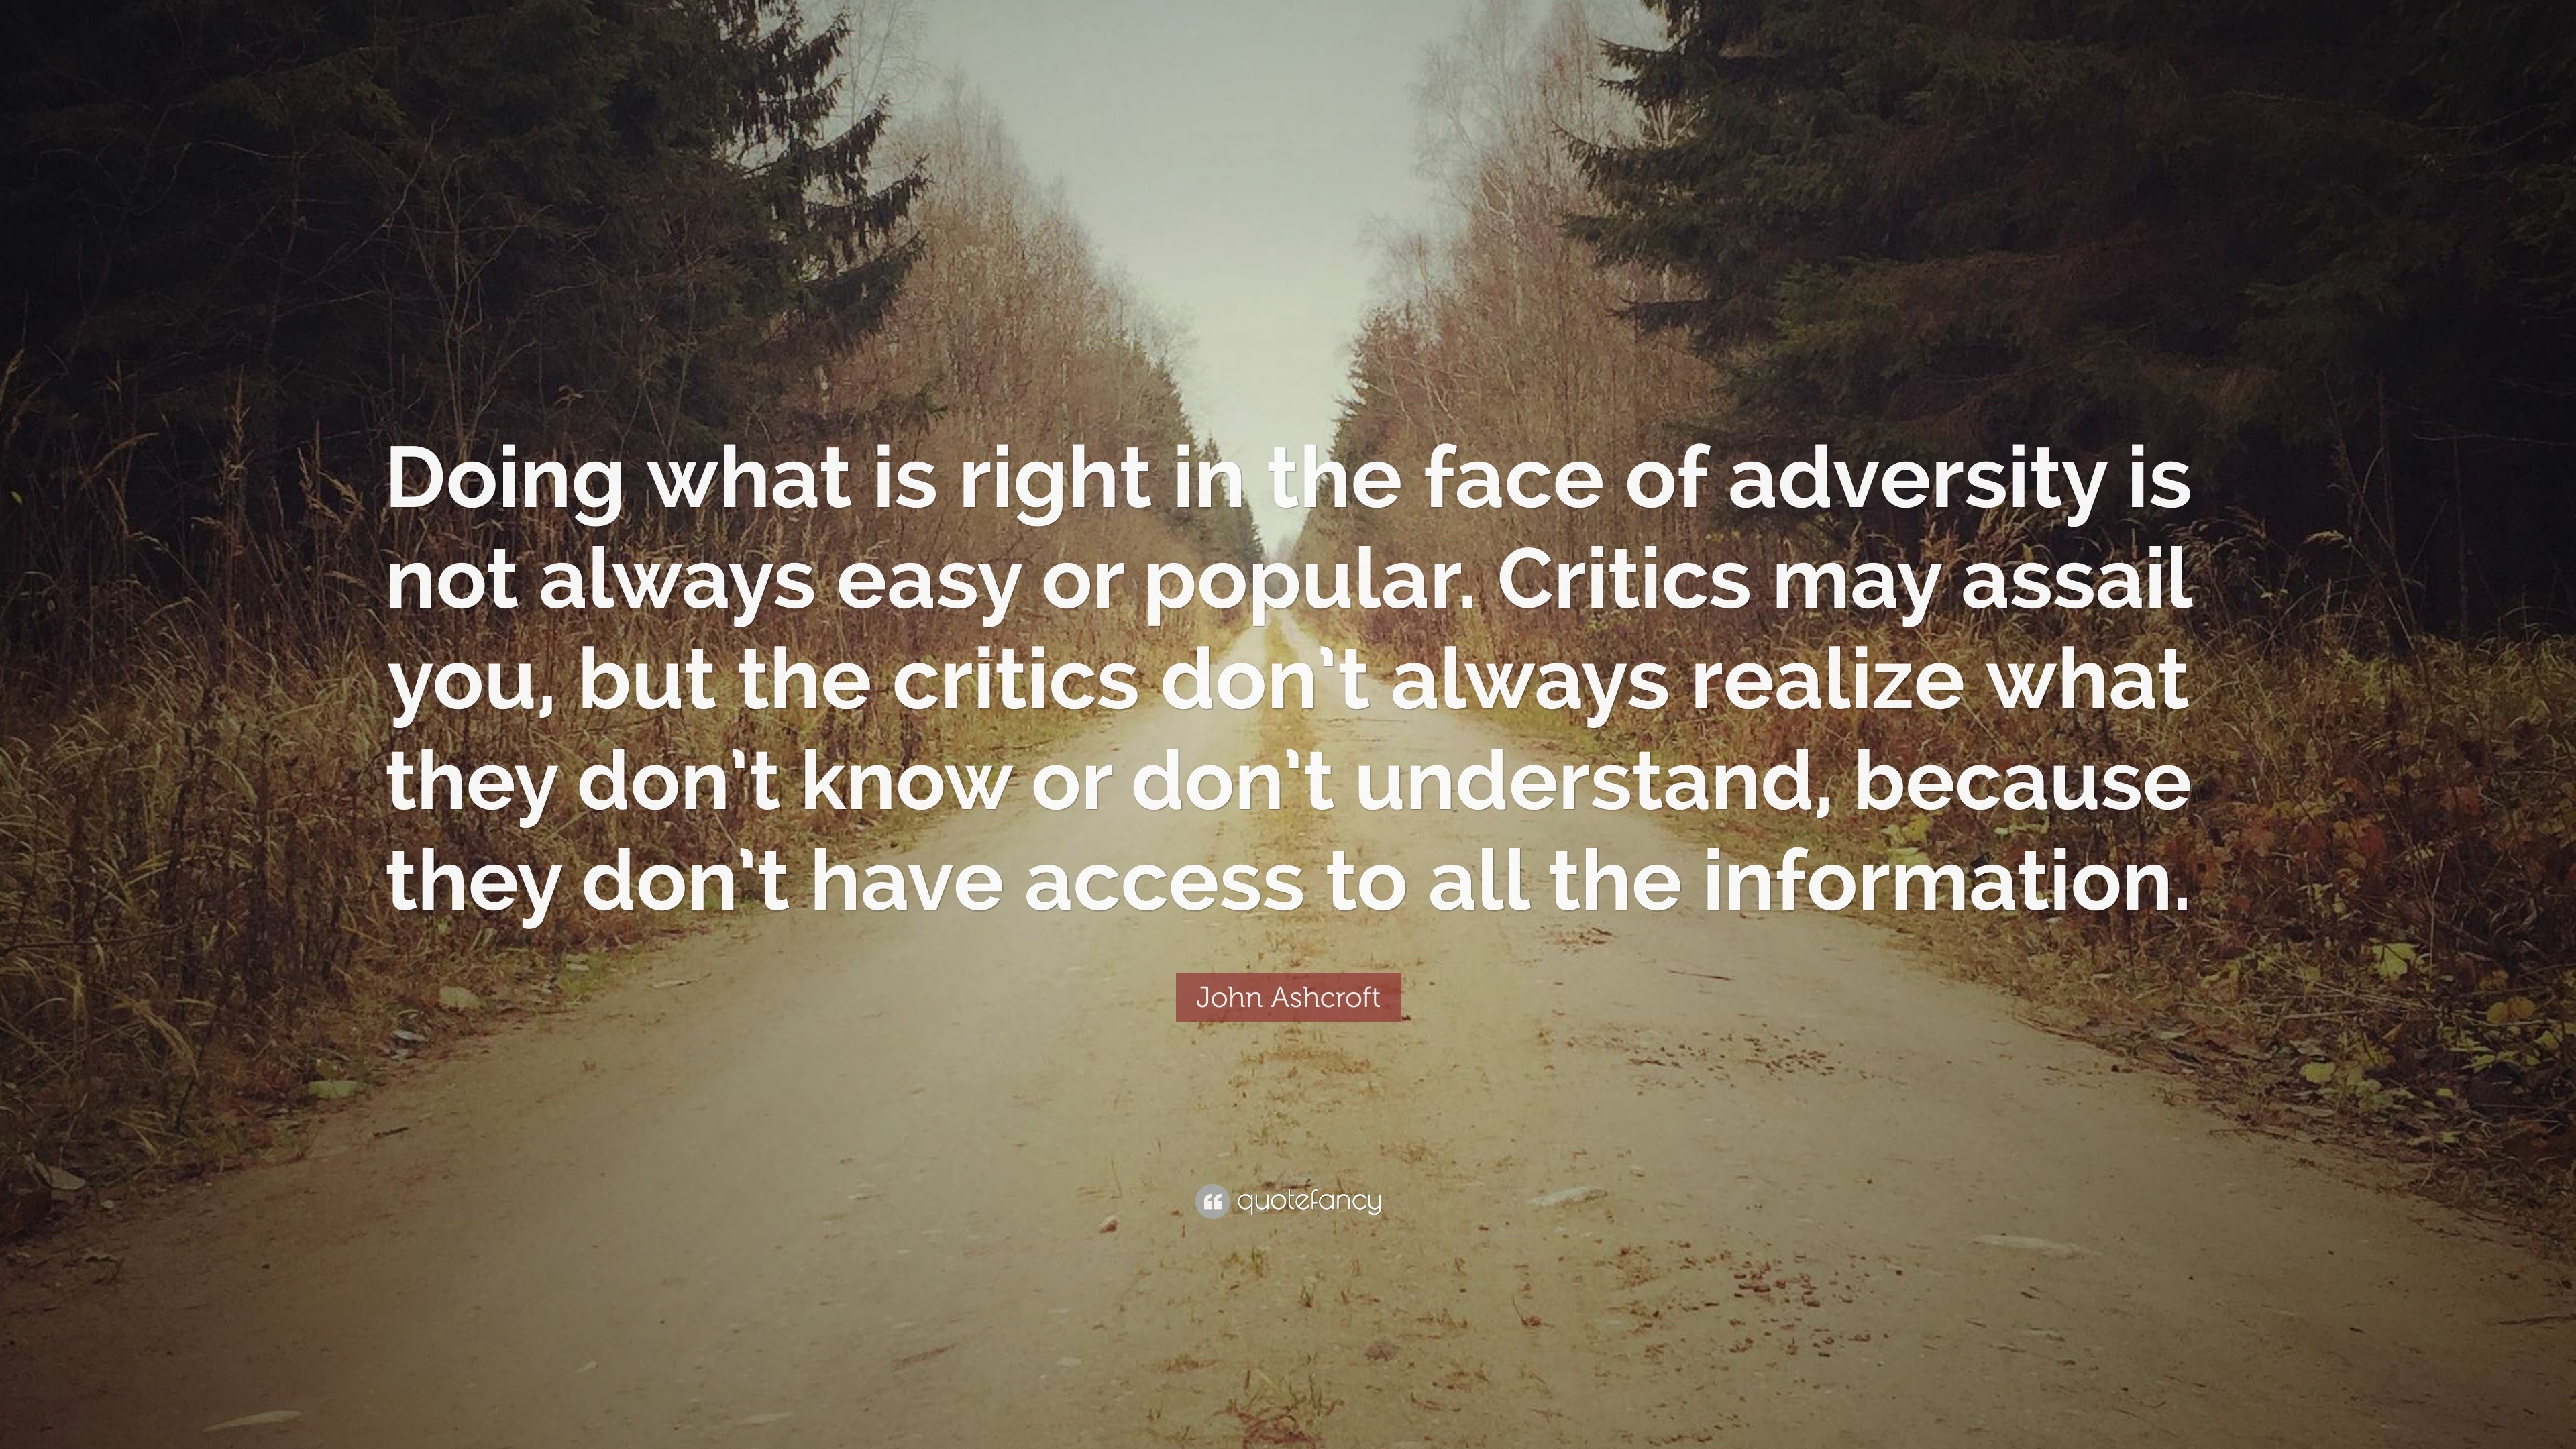 John Ashcroft Quote Doing What Is Right In The Face Of Adversity Is Not Always Easy Or Popular Critics May Assail You But The Critics Don